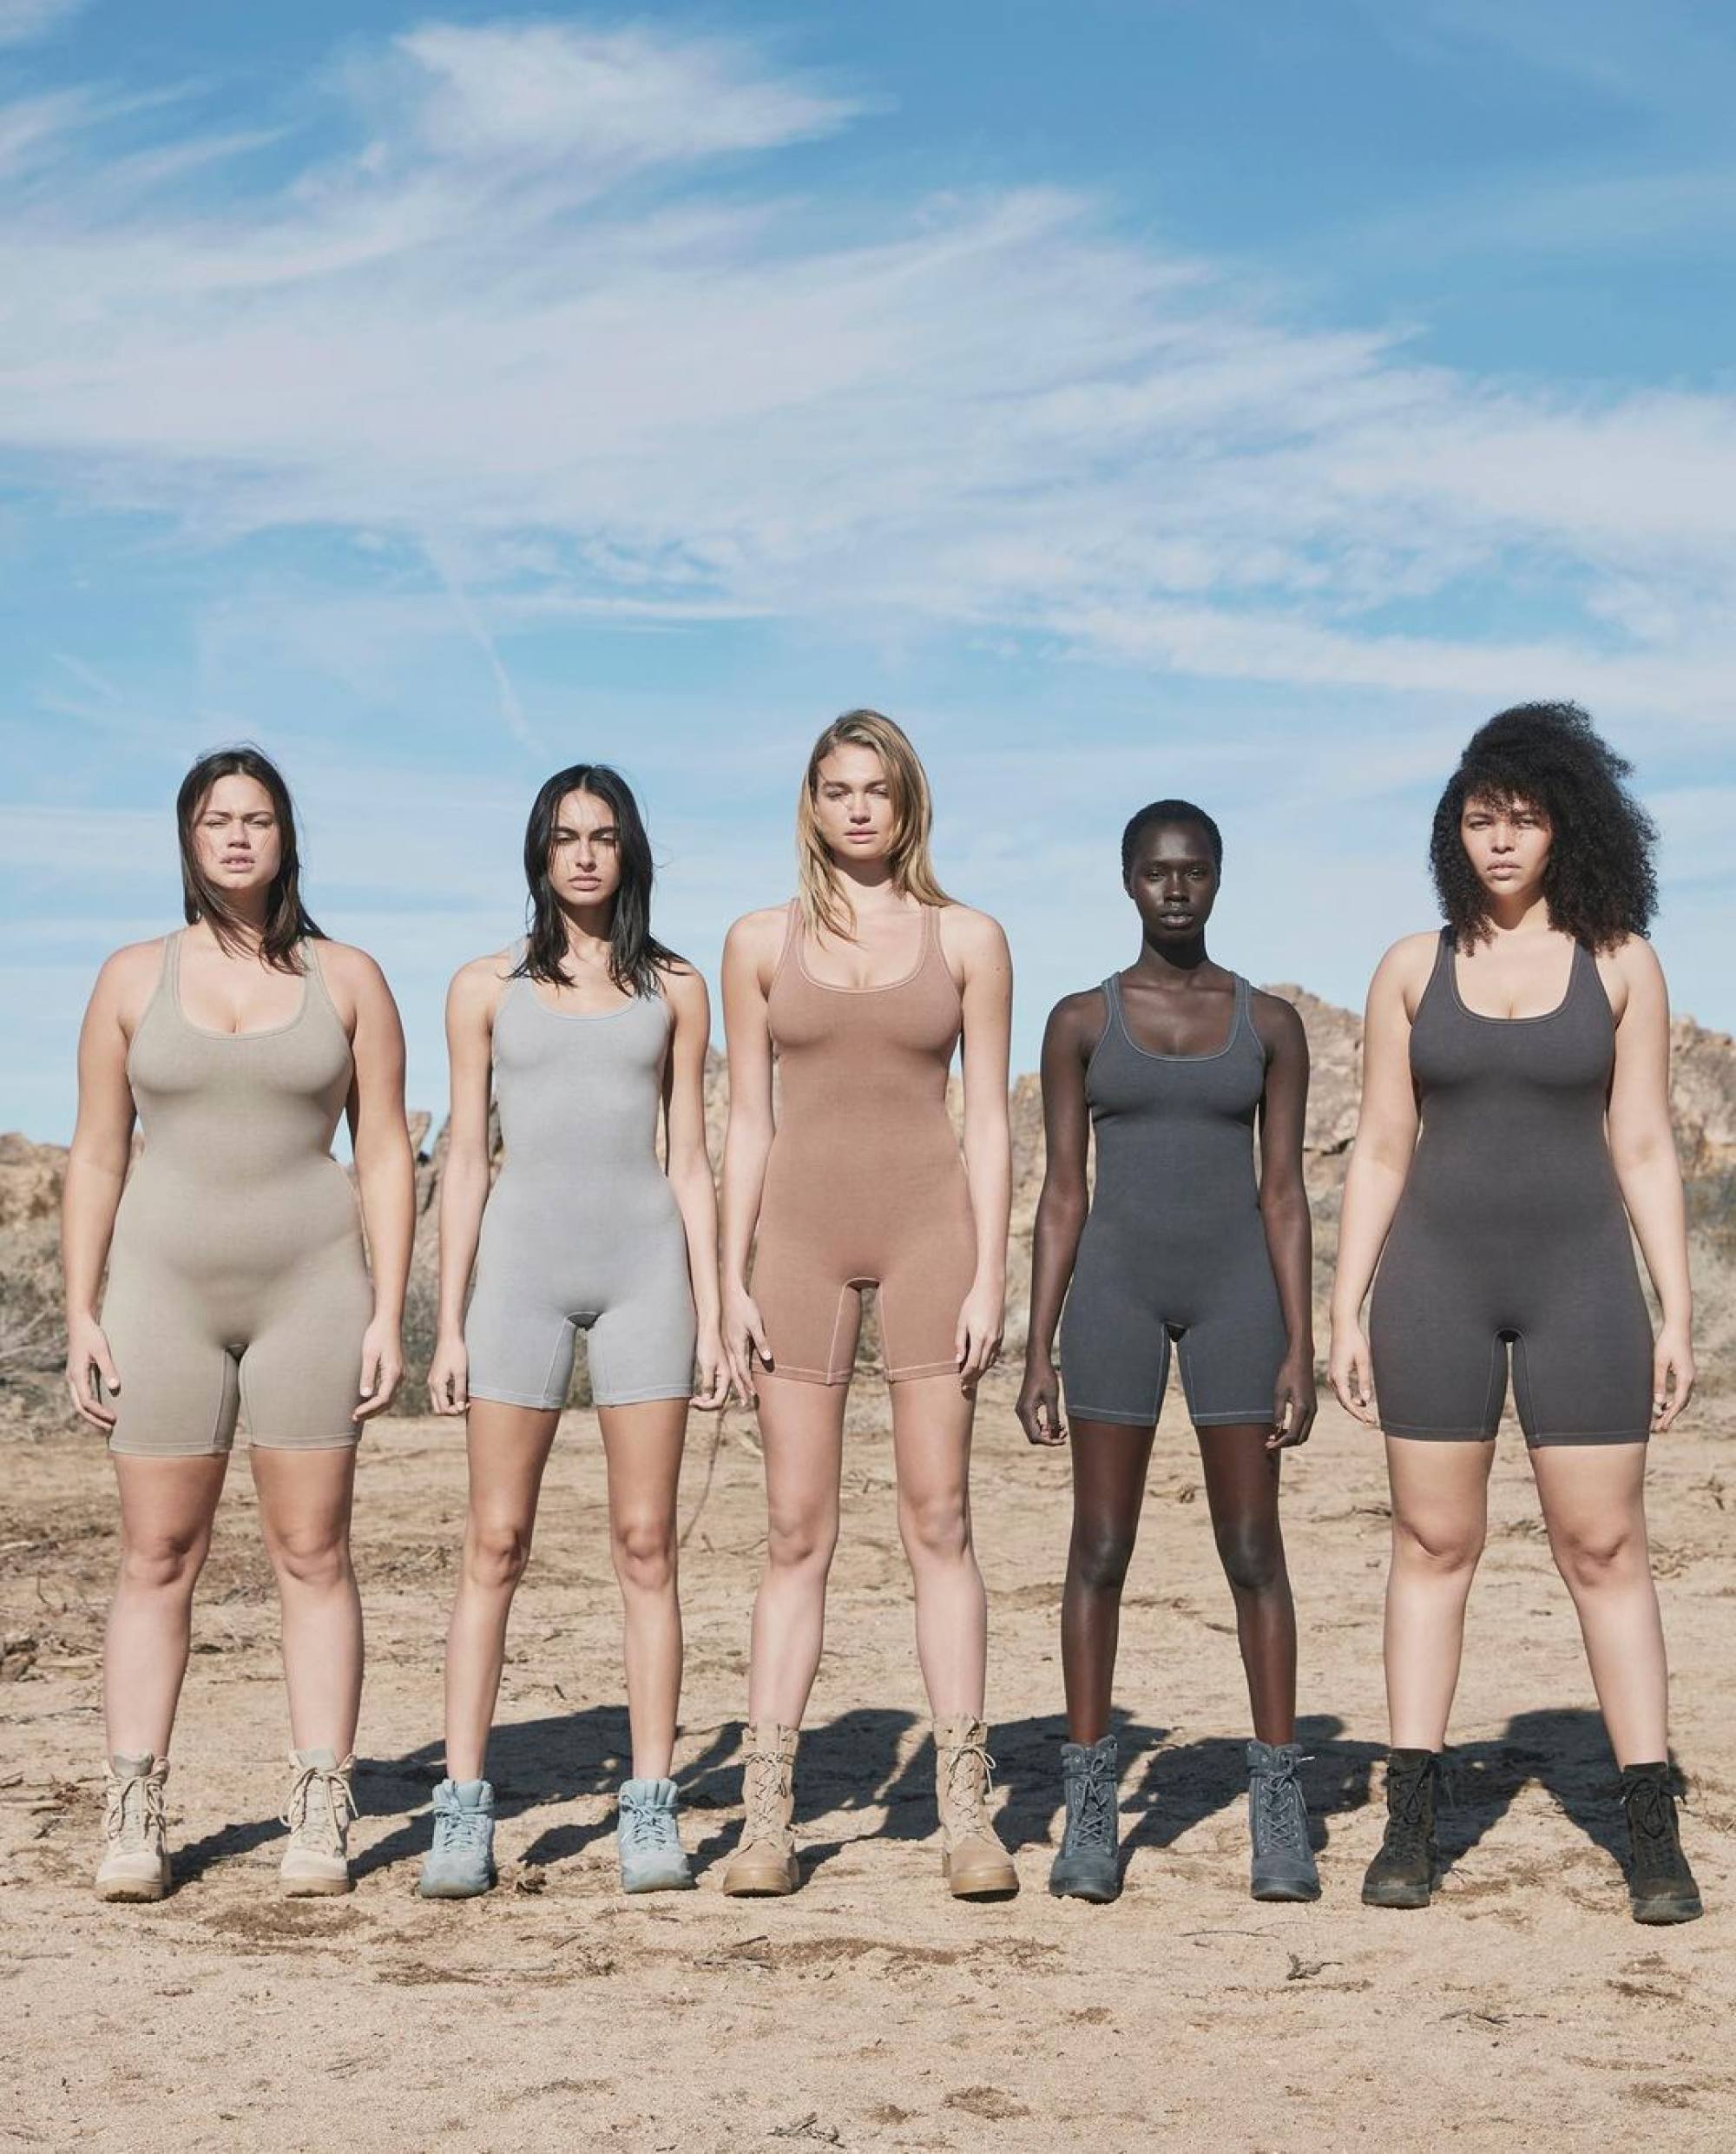 Take that, haters: Kim Kardashian's Skims just doubled in value to US$3.2  billion – inspired by Lululemon and Starbucks, the shapewear brand is  creating its own retail category